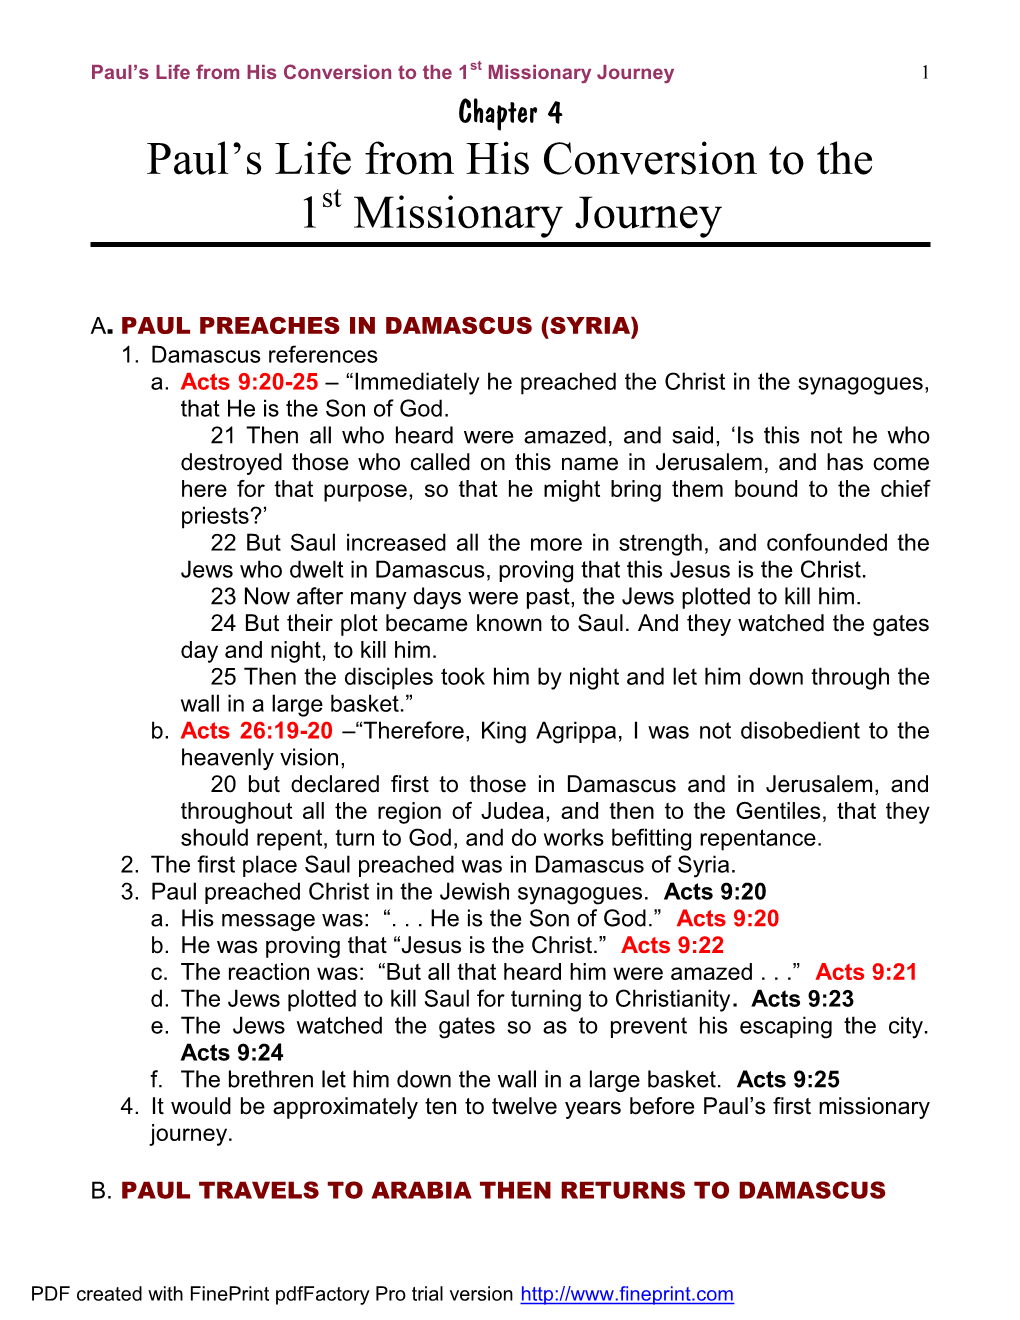 Paul's Life from His Conversion to the 1 Missionary Journey